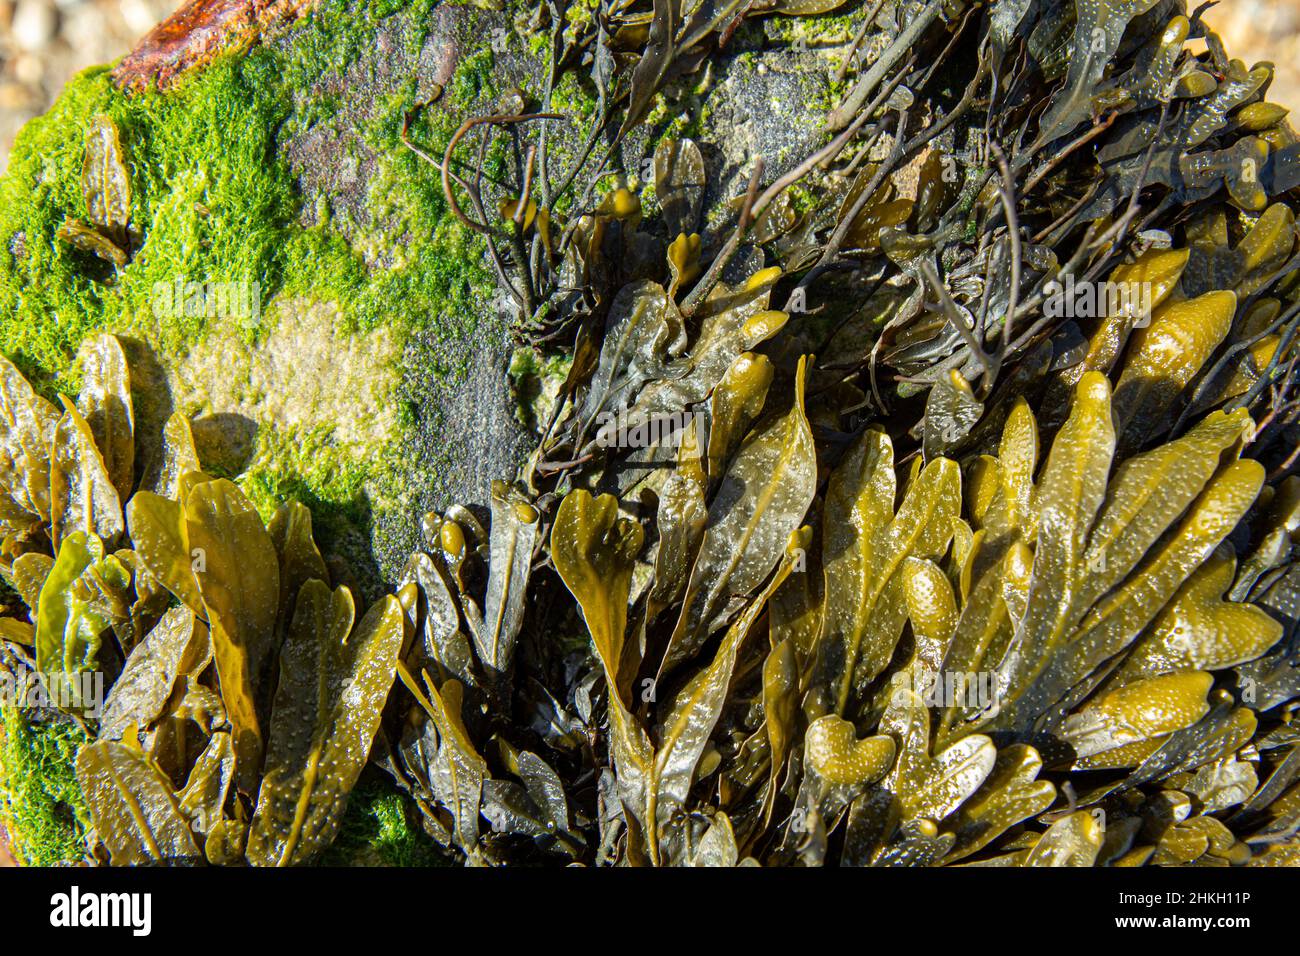 Close up of a seaweed covered breakwater on the beach with green seaweed and bright green seaweed. Stock Photo